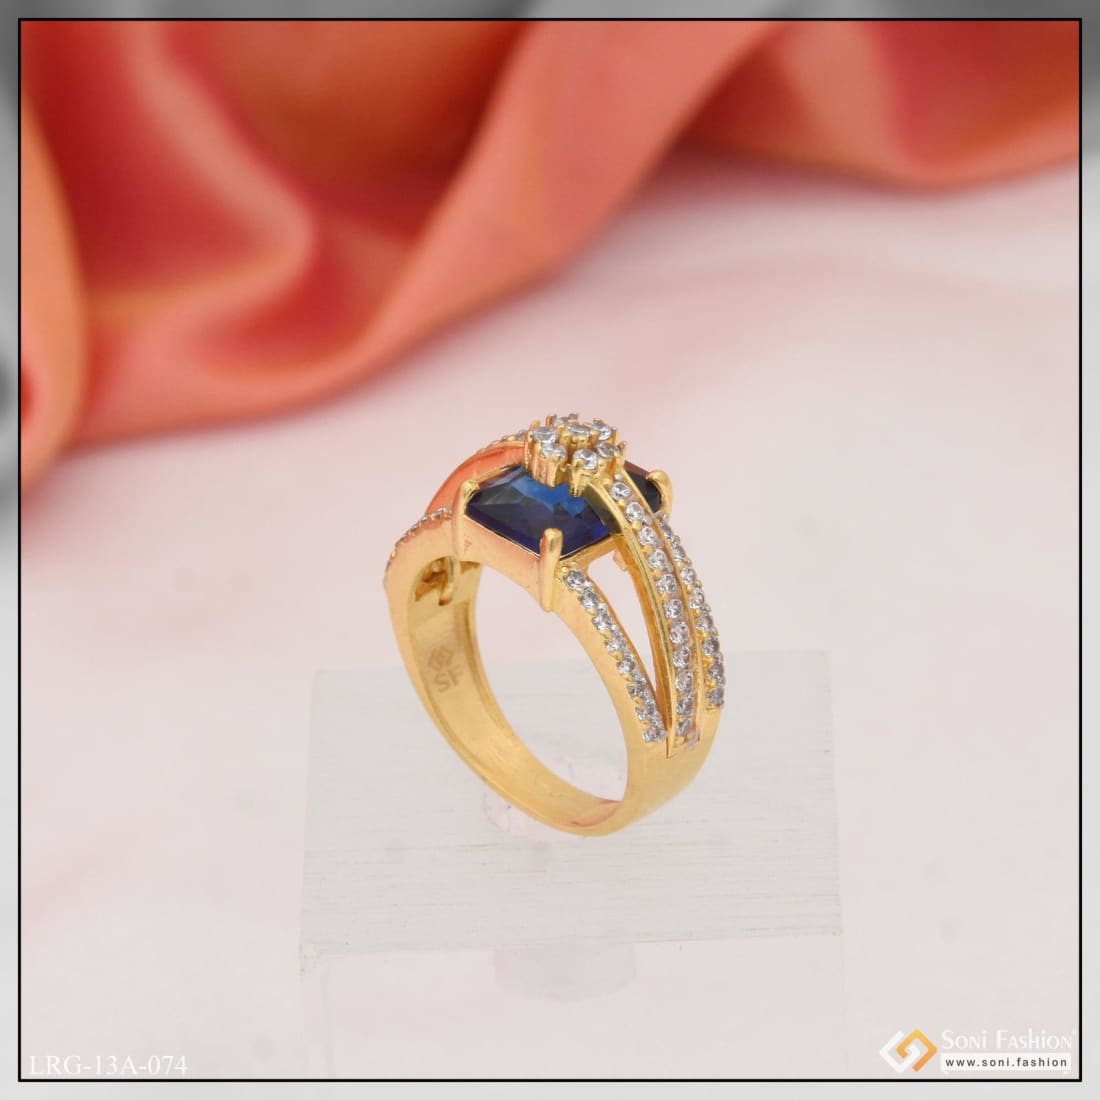 22K Gold Ring for Women with Cz - 235-GR8056 in 2.300 Grams